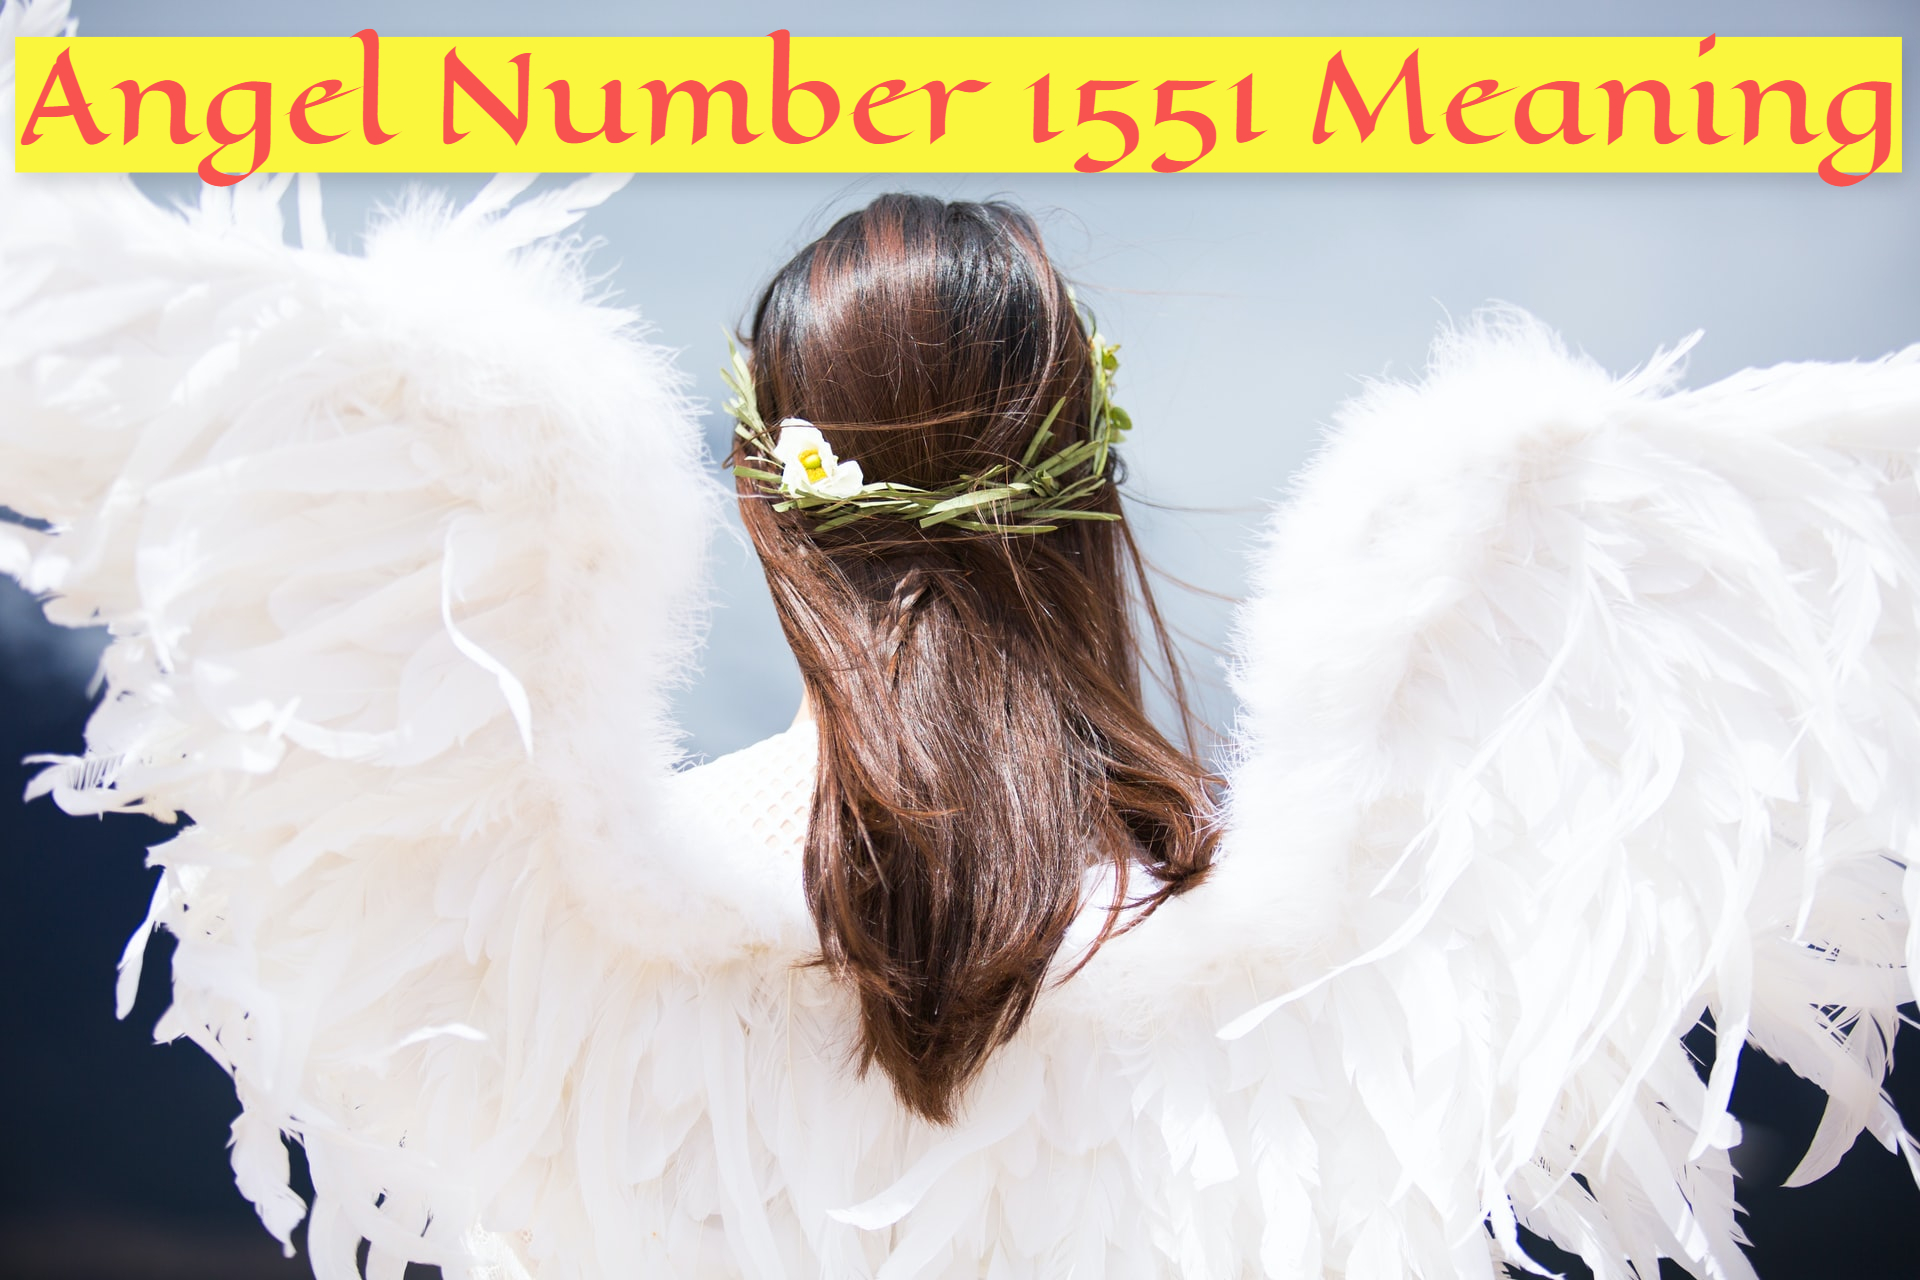 Angel Number 1551 Meaning - Indicates Life Purpose And Success